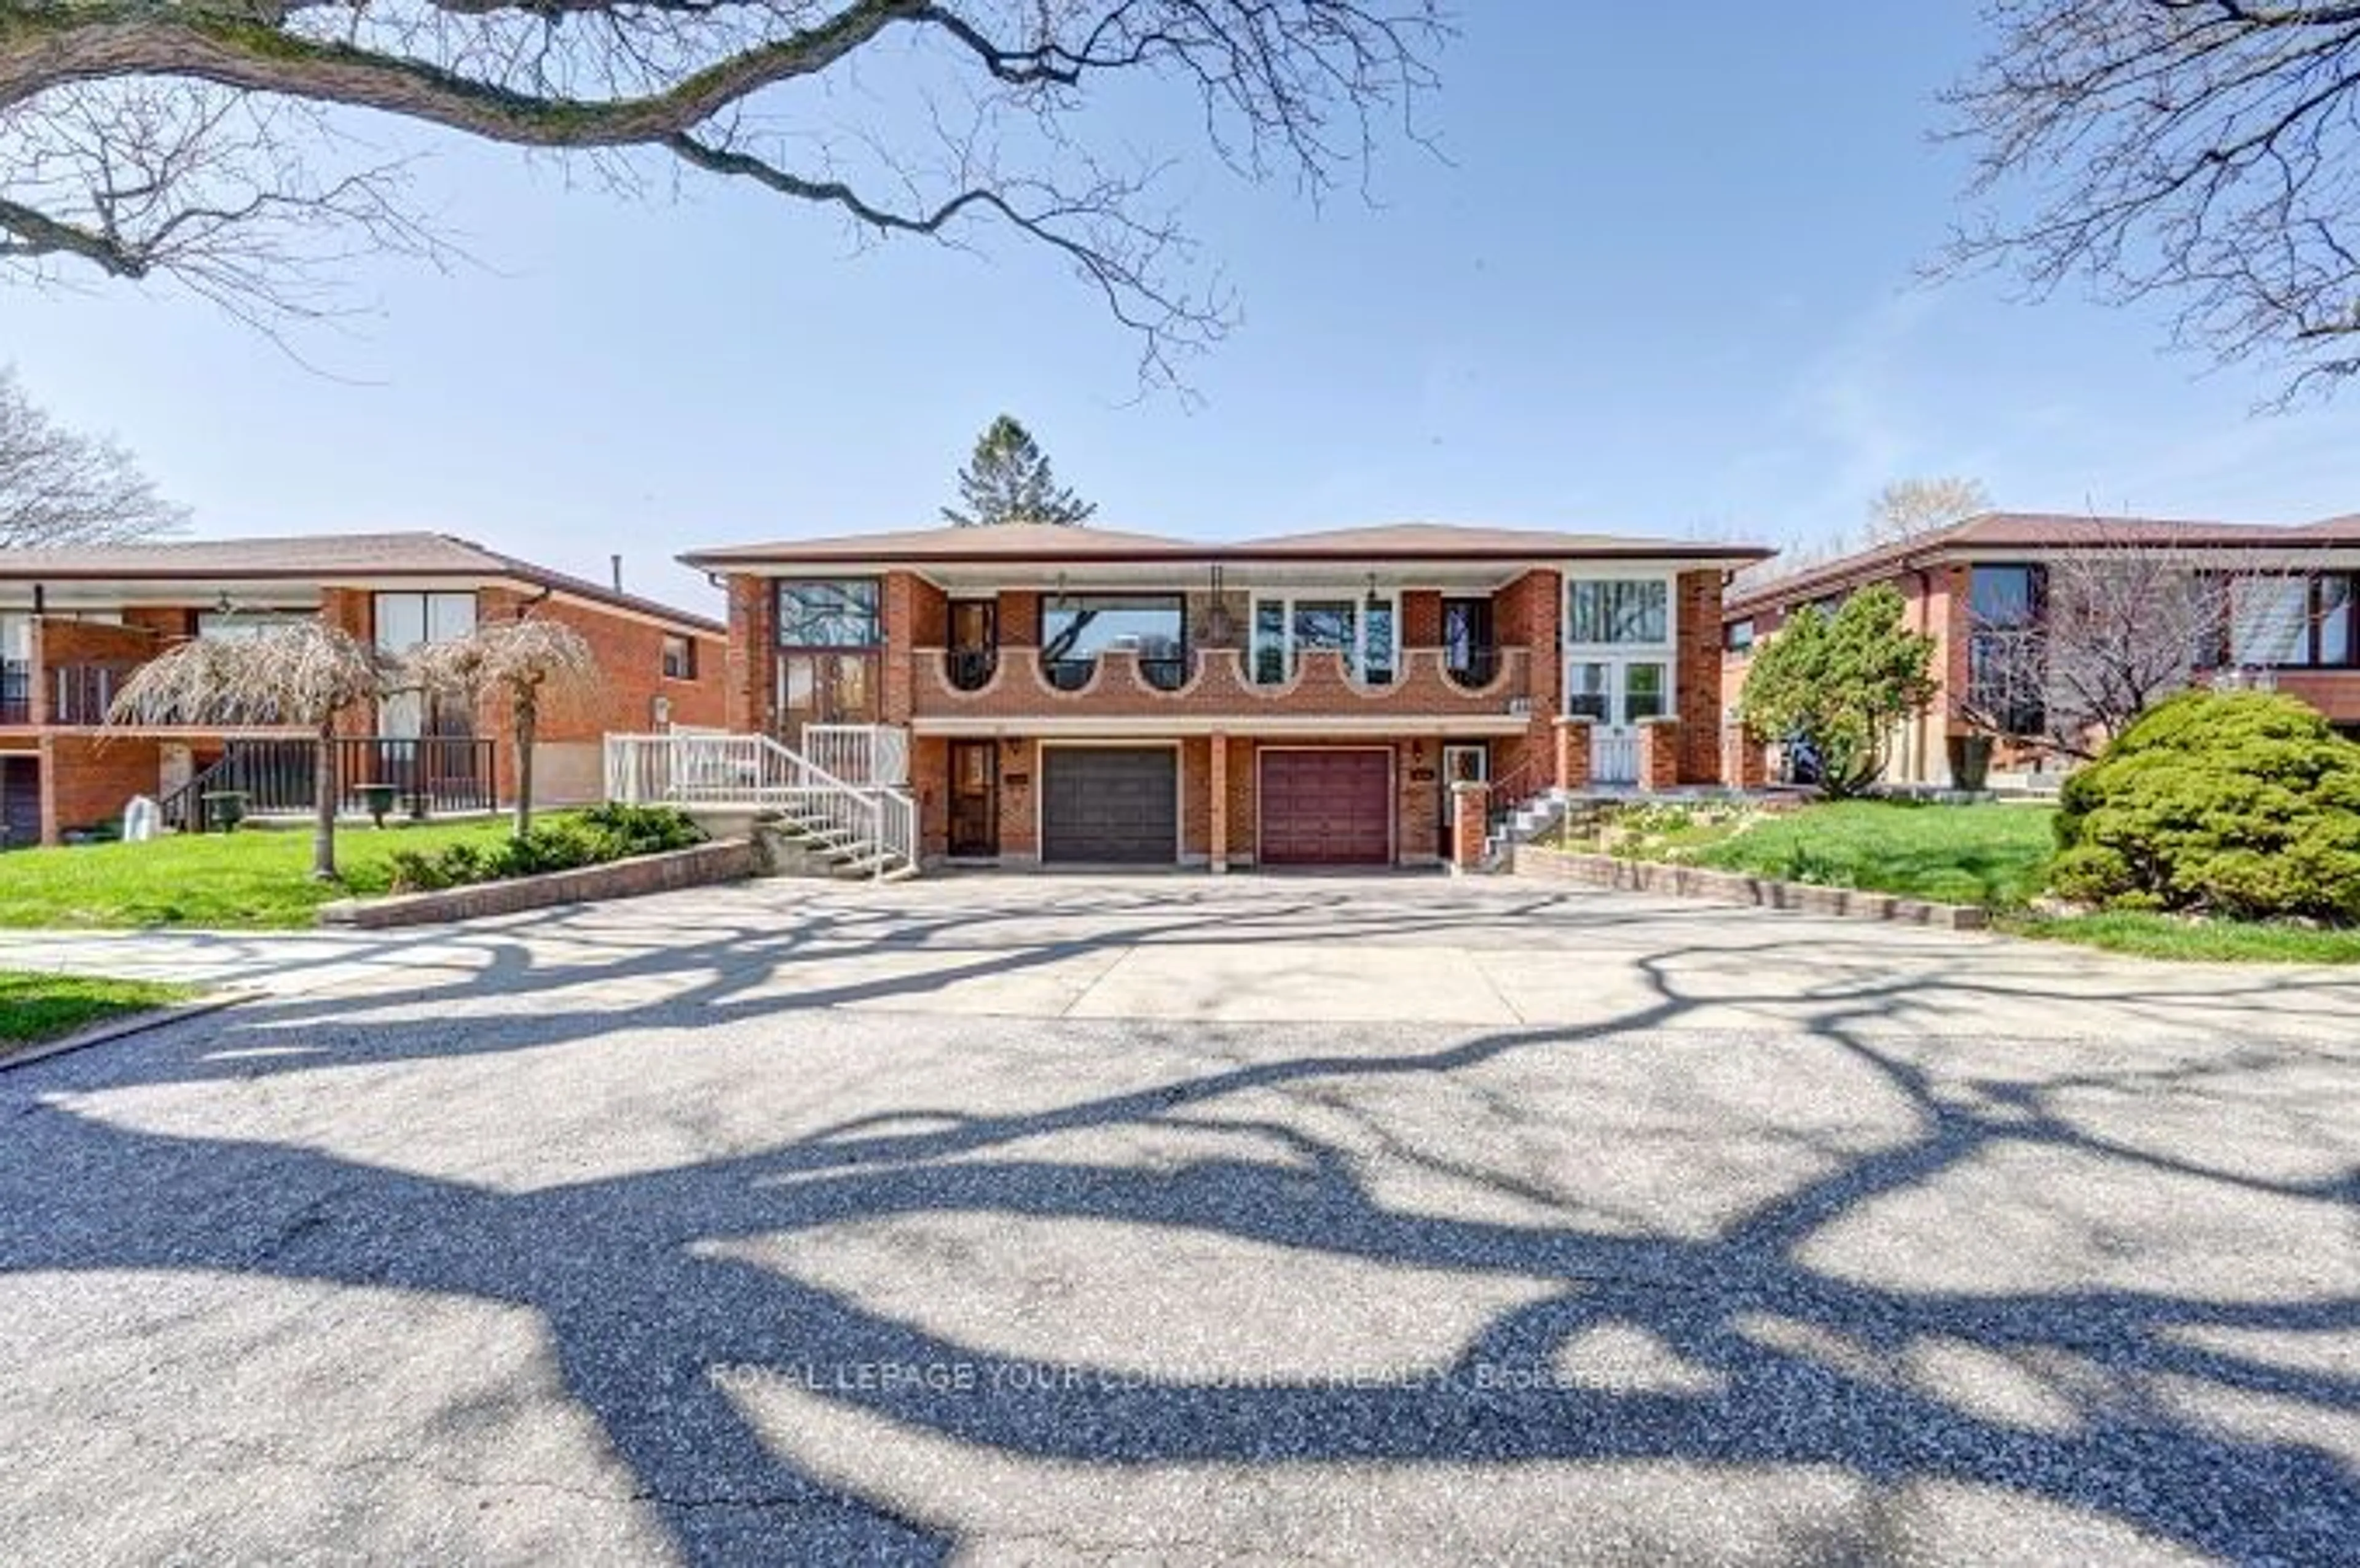 Home with brick exterior material for 43 Starview Dr, Toronto Ontario M9M 1K7